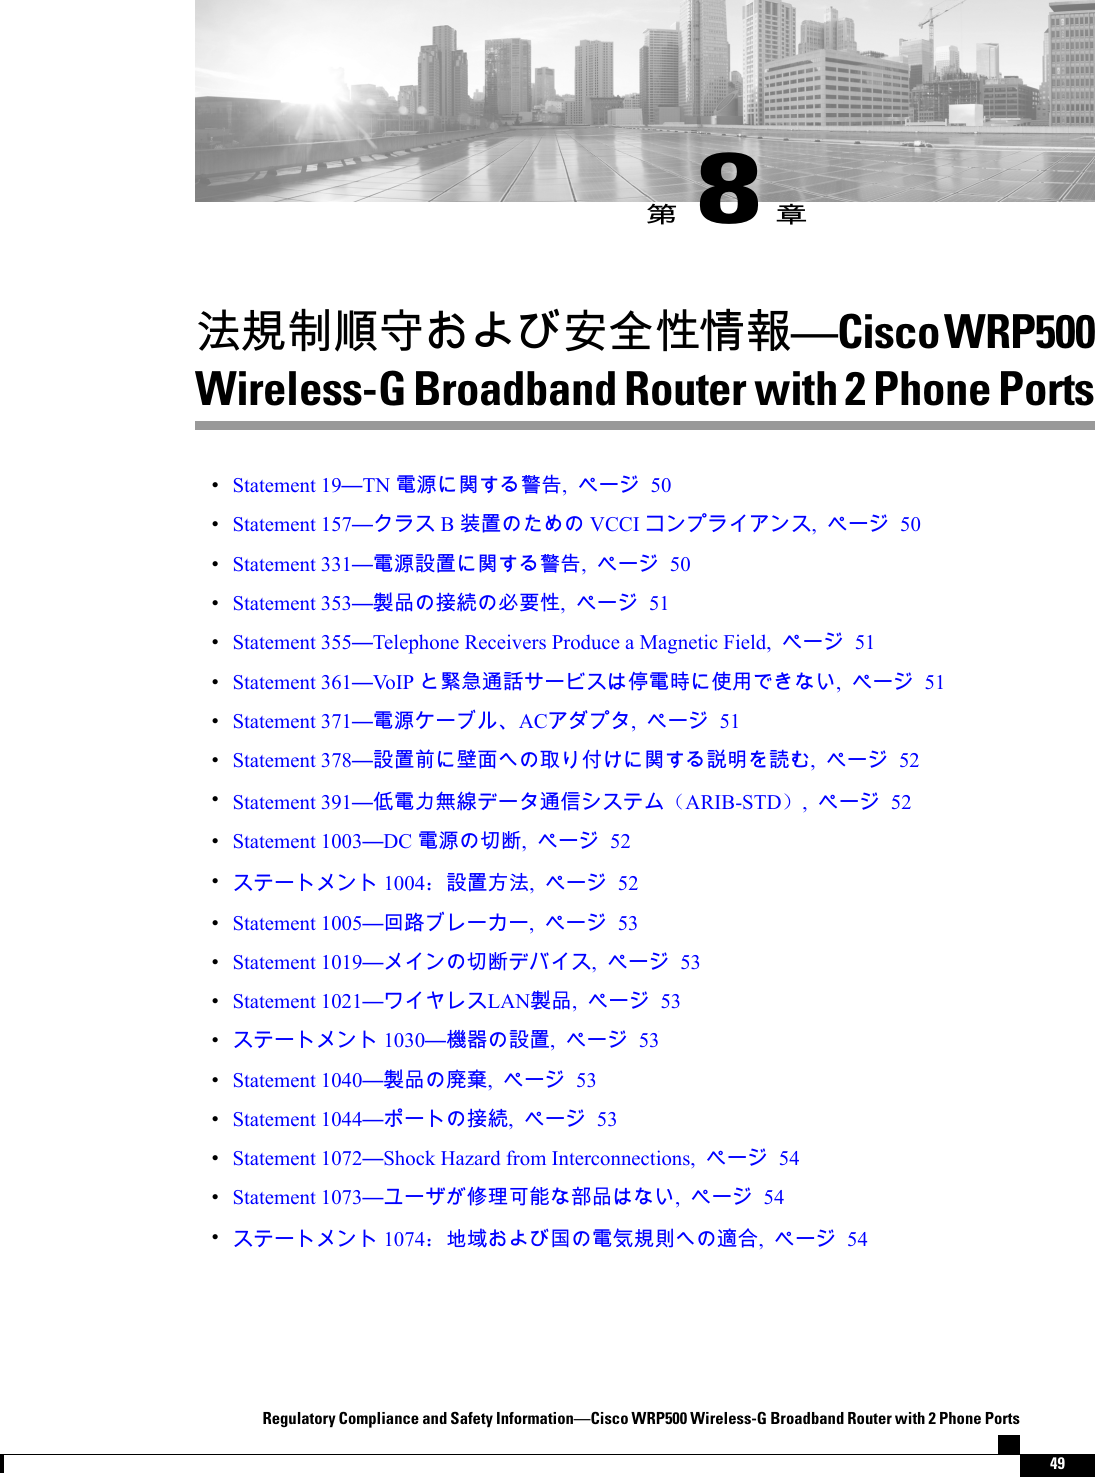 󳒼8󳑰󲙥󴌟󰯆󵆖󱔘󱔙󰫸󱦷󱩕󱇁Cisco WRP500Wireless-G Broadband Router with 2 Phone PortsStatement 19TN 󵂋󲠠󴼲󴓶󰷚, 50Statement 157 B󴉕󳣾 VCCI , 50Statement 331󵂋󲠠󴎽󳣾󴼲󴓶󰷚, 50Statement 353󴊍󰹑󱴵󳜪󱥕󴌑󱦷, 51Statement 355Telephone Receivers Produce a Magnetic Field,  51Statement 361VoIP 󳝚󱦵󴦪󴐁󰧬󵂋󱿒󰤏󲺸, 51Statement 371󵂋󲠠AC, 51Statement 378󴎽󳣾󰯝󱉑󵃲󰵦󰡨󴼲󴐼󱾞󴐽, 52Statement 391󰣞󵂋󰰫󲪱󳝪󴦪󰥱（ARIB-STD）, 52Statement 1003DC 󵂋󲠠󰮗󱼽, 52 1004：󴎽󳣾󱽉󲙥, 52Statement 1005󱁮󴝿, 53Statement 1019󰮗󱼽, 53Statement 1021LAN󴊍󰹑, 53 1030󲏯󰿸󴎽󳣾, 53Statement 1040󴊍󰹑󱡓󲉔, 53Statement 1044󱴵󳜪, 53Statement 1072Shock Hazard from Interconnections,  54Statement 1073󰥾󲶖󰵿󳪍󴩸󰹑, 54 1074：󱃀󱅯󱂍󵂋󲖧󴌟󰯗󴧹󰶘, 54Regulatory Compliance and Safety InformationCisco WRP500 Wireless-G Broadband Router with 2 Phone Ports49